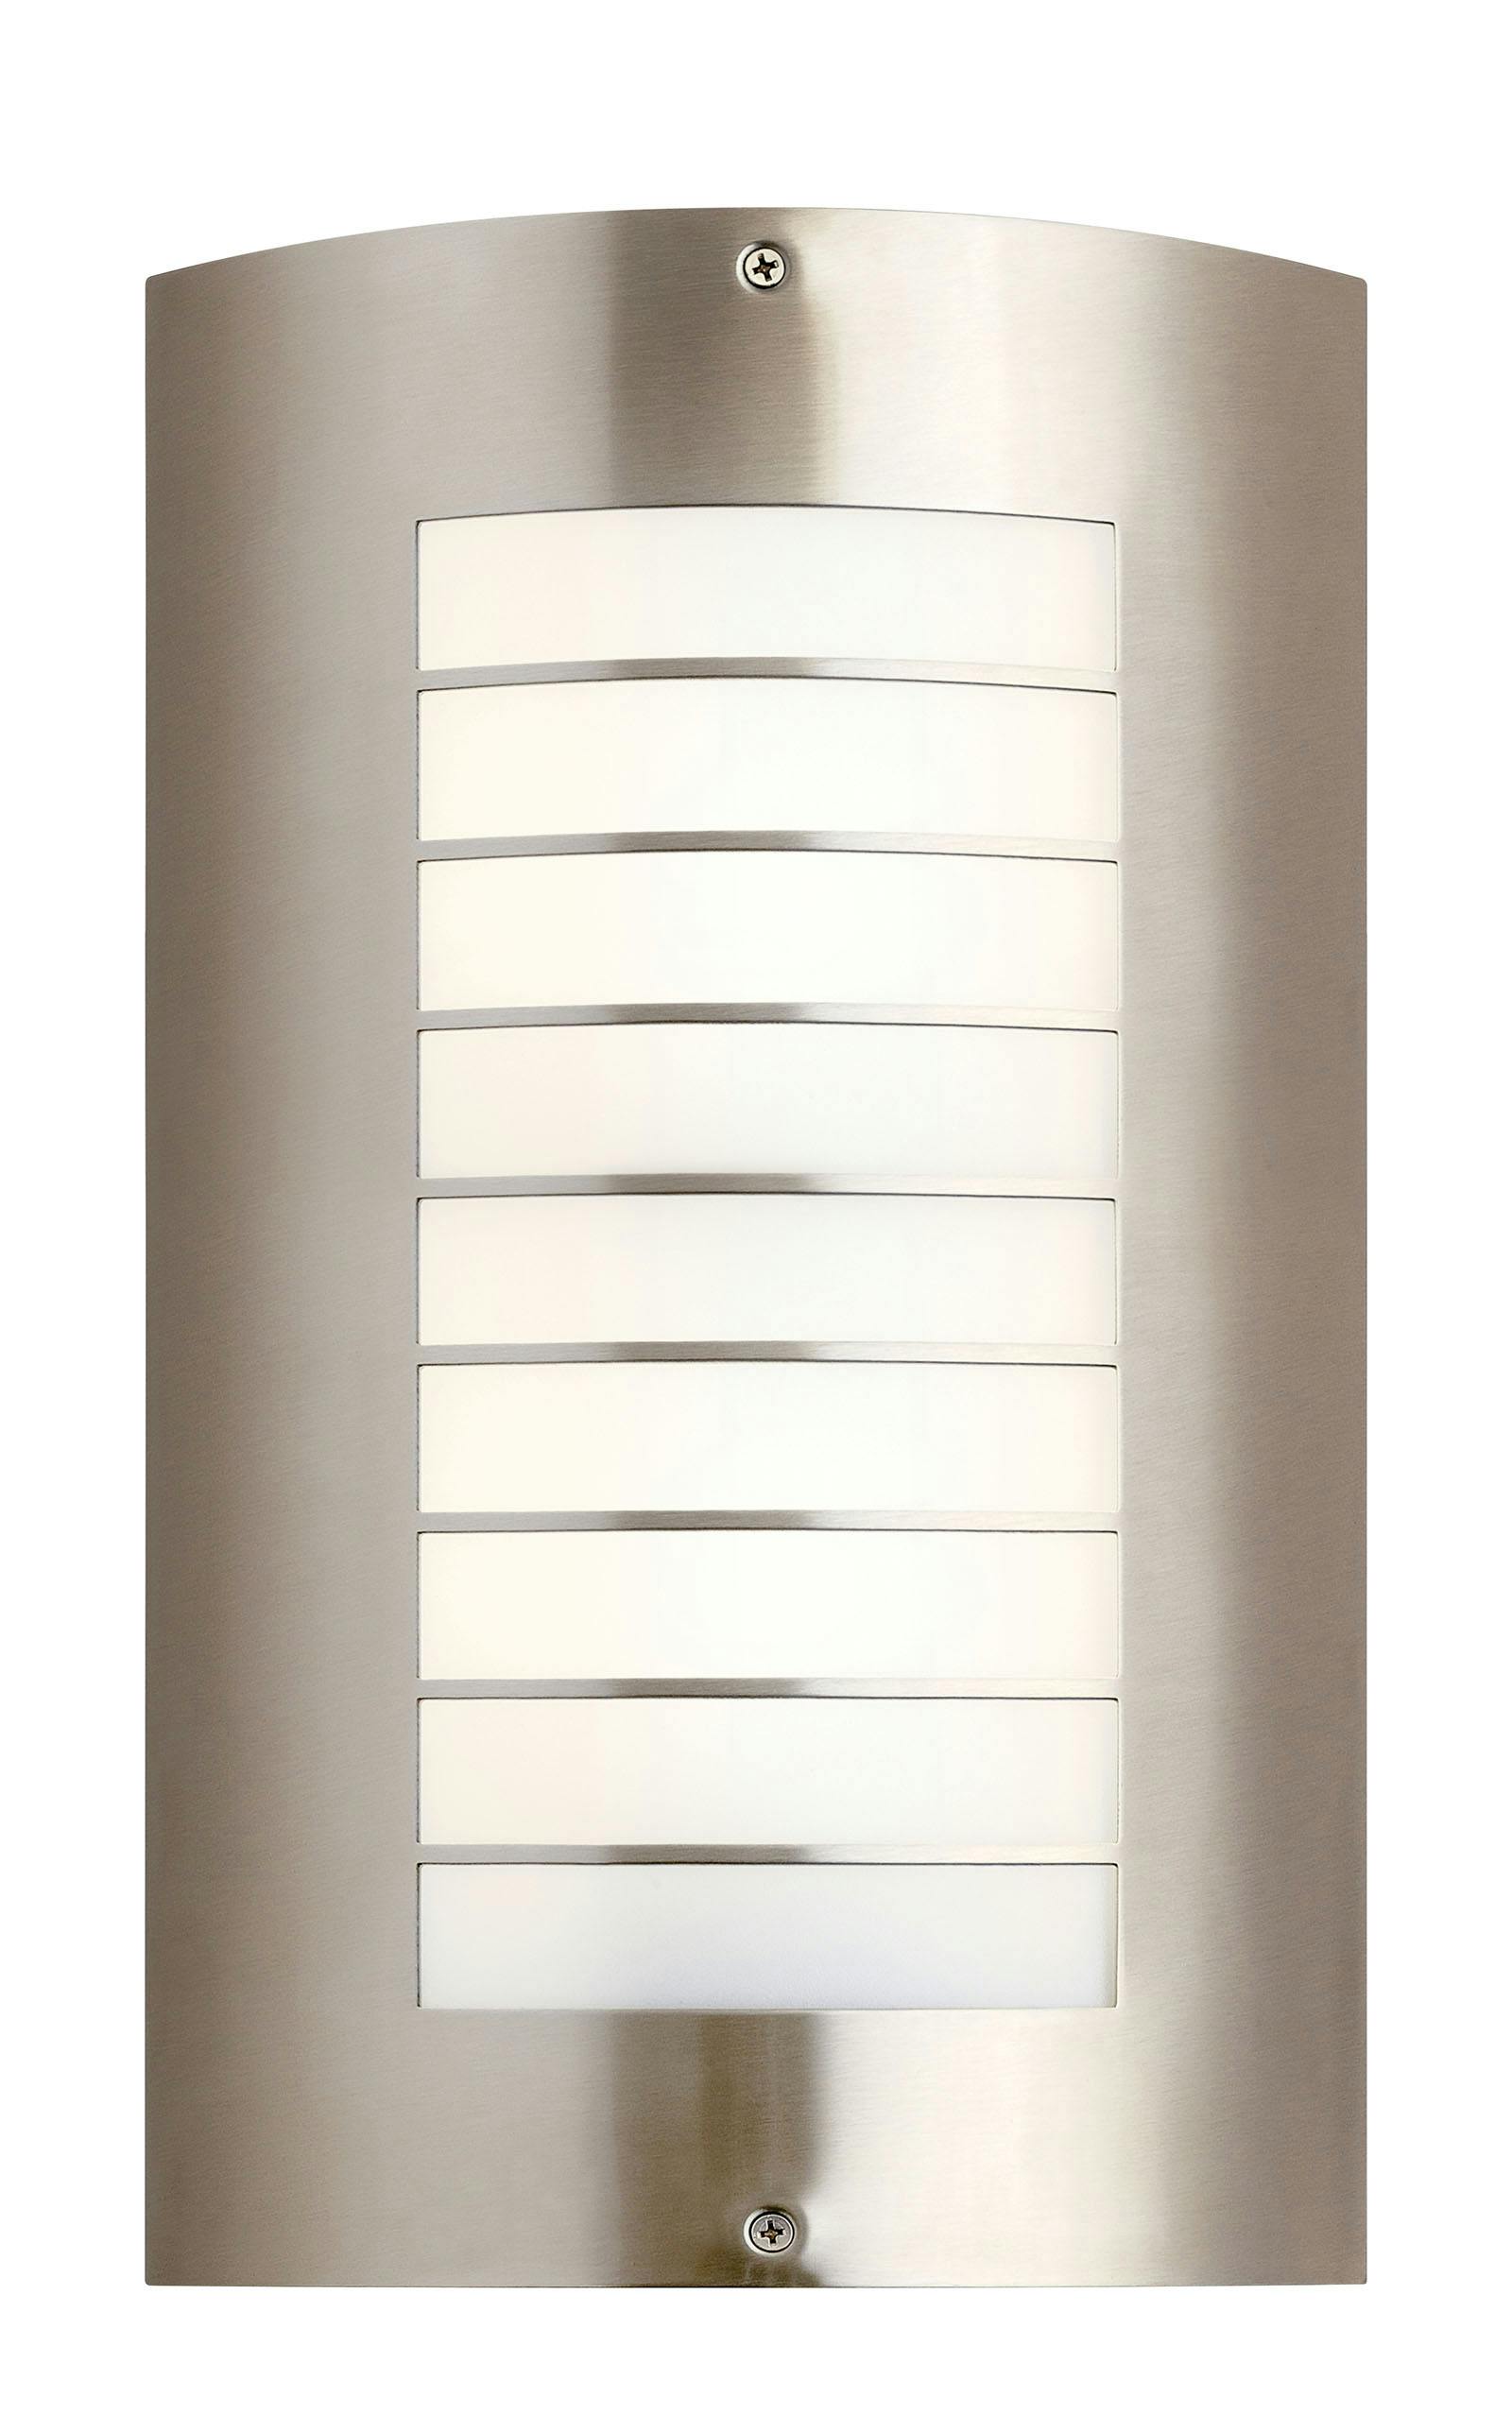 Newport 15.25" Wall Light in Nickel on a white background